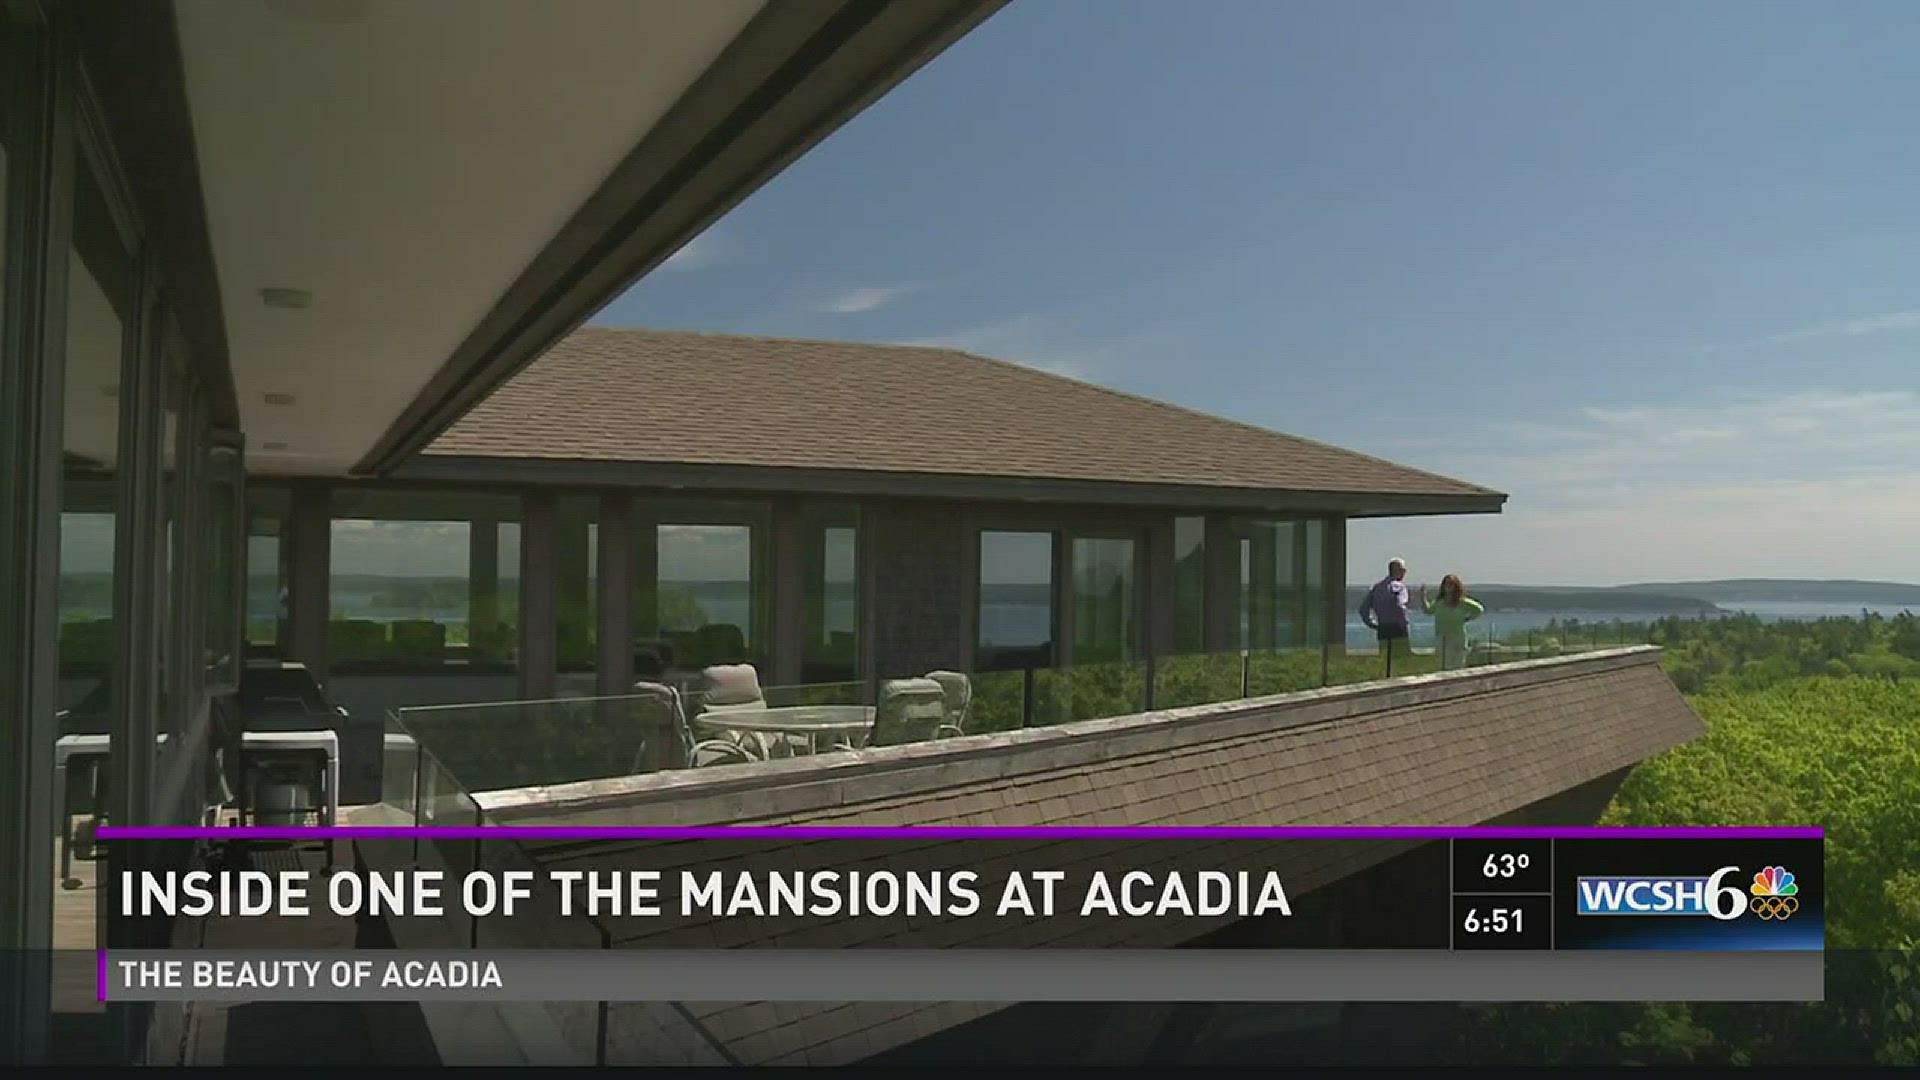 Inside one of the mansions at Acadia